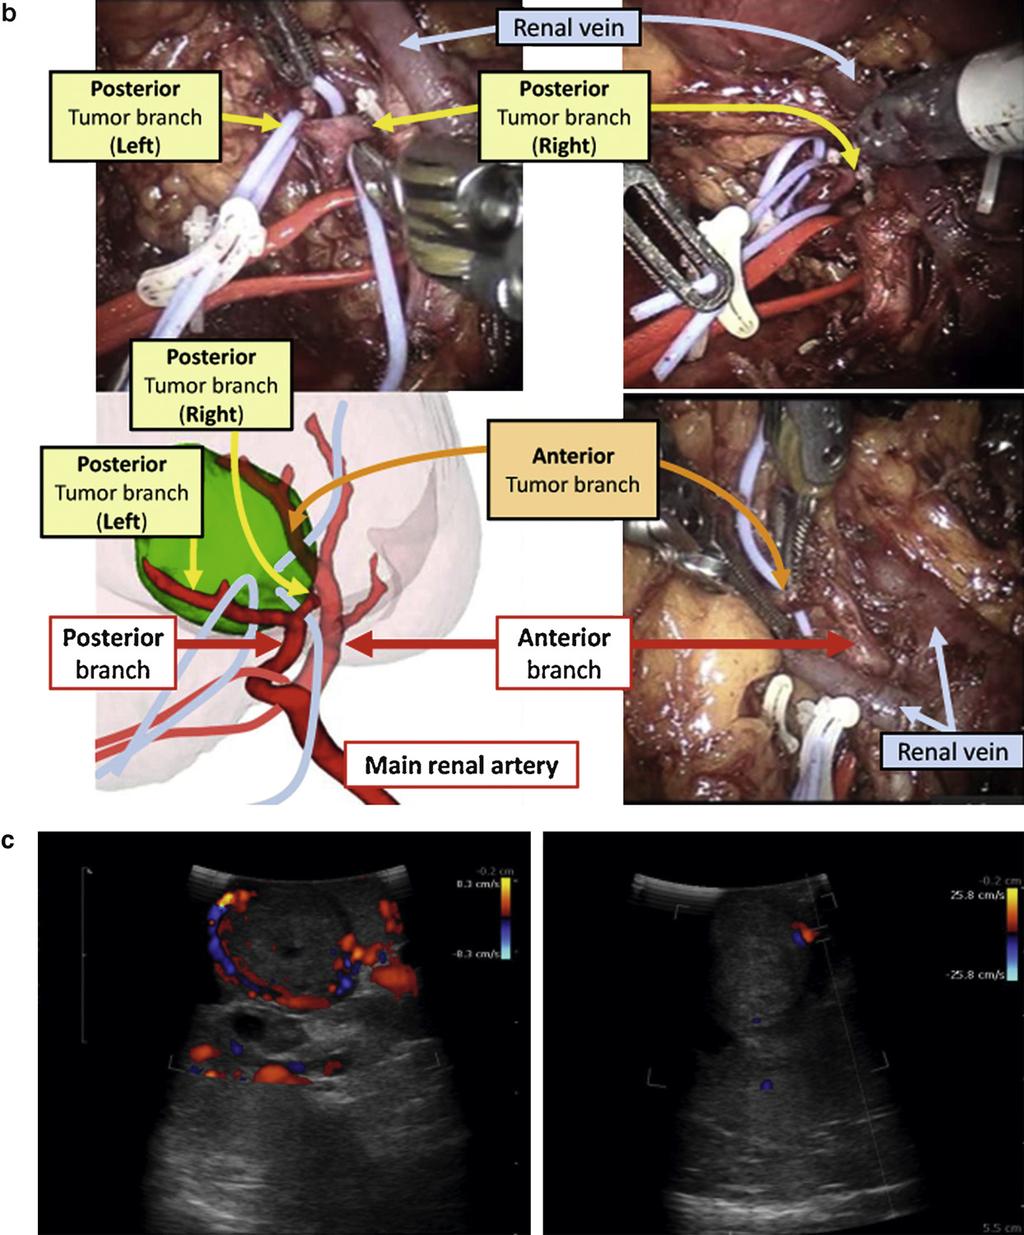 [(_)TD$FIG][(_)TD$FIG] EUROPEAN UROLOGY 61 (2012) 211 217 213 Fig. 2. (Continued ). the 3D arteriogram with 3D surface-rendered tumor and kidney models.